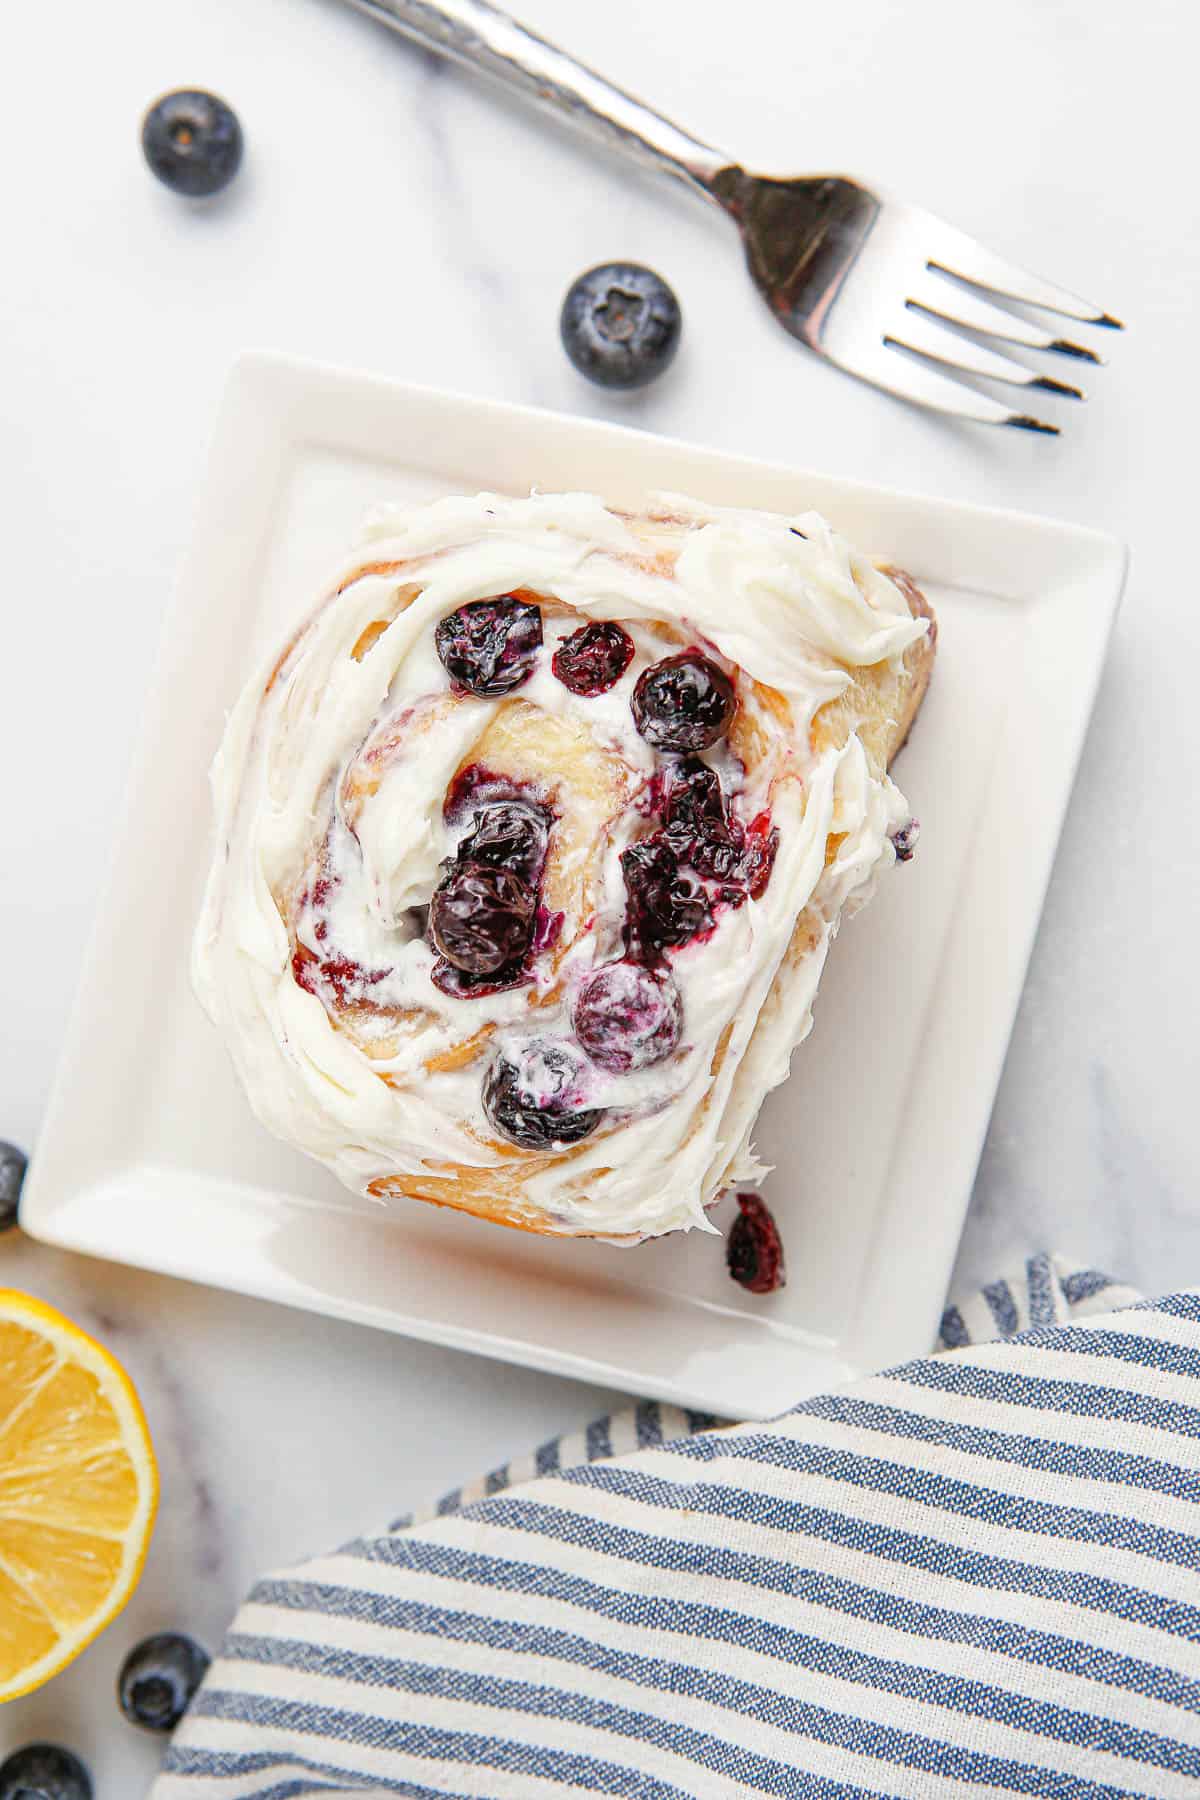 Overhead of a lemon blueberry sweet roll on a white plate with a lemon half, fork and striped towel around it.